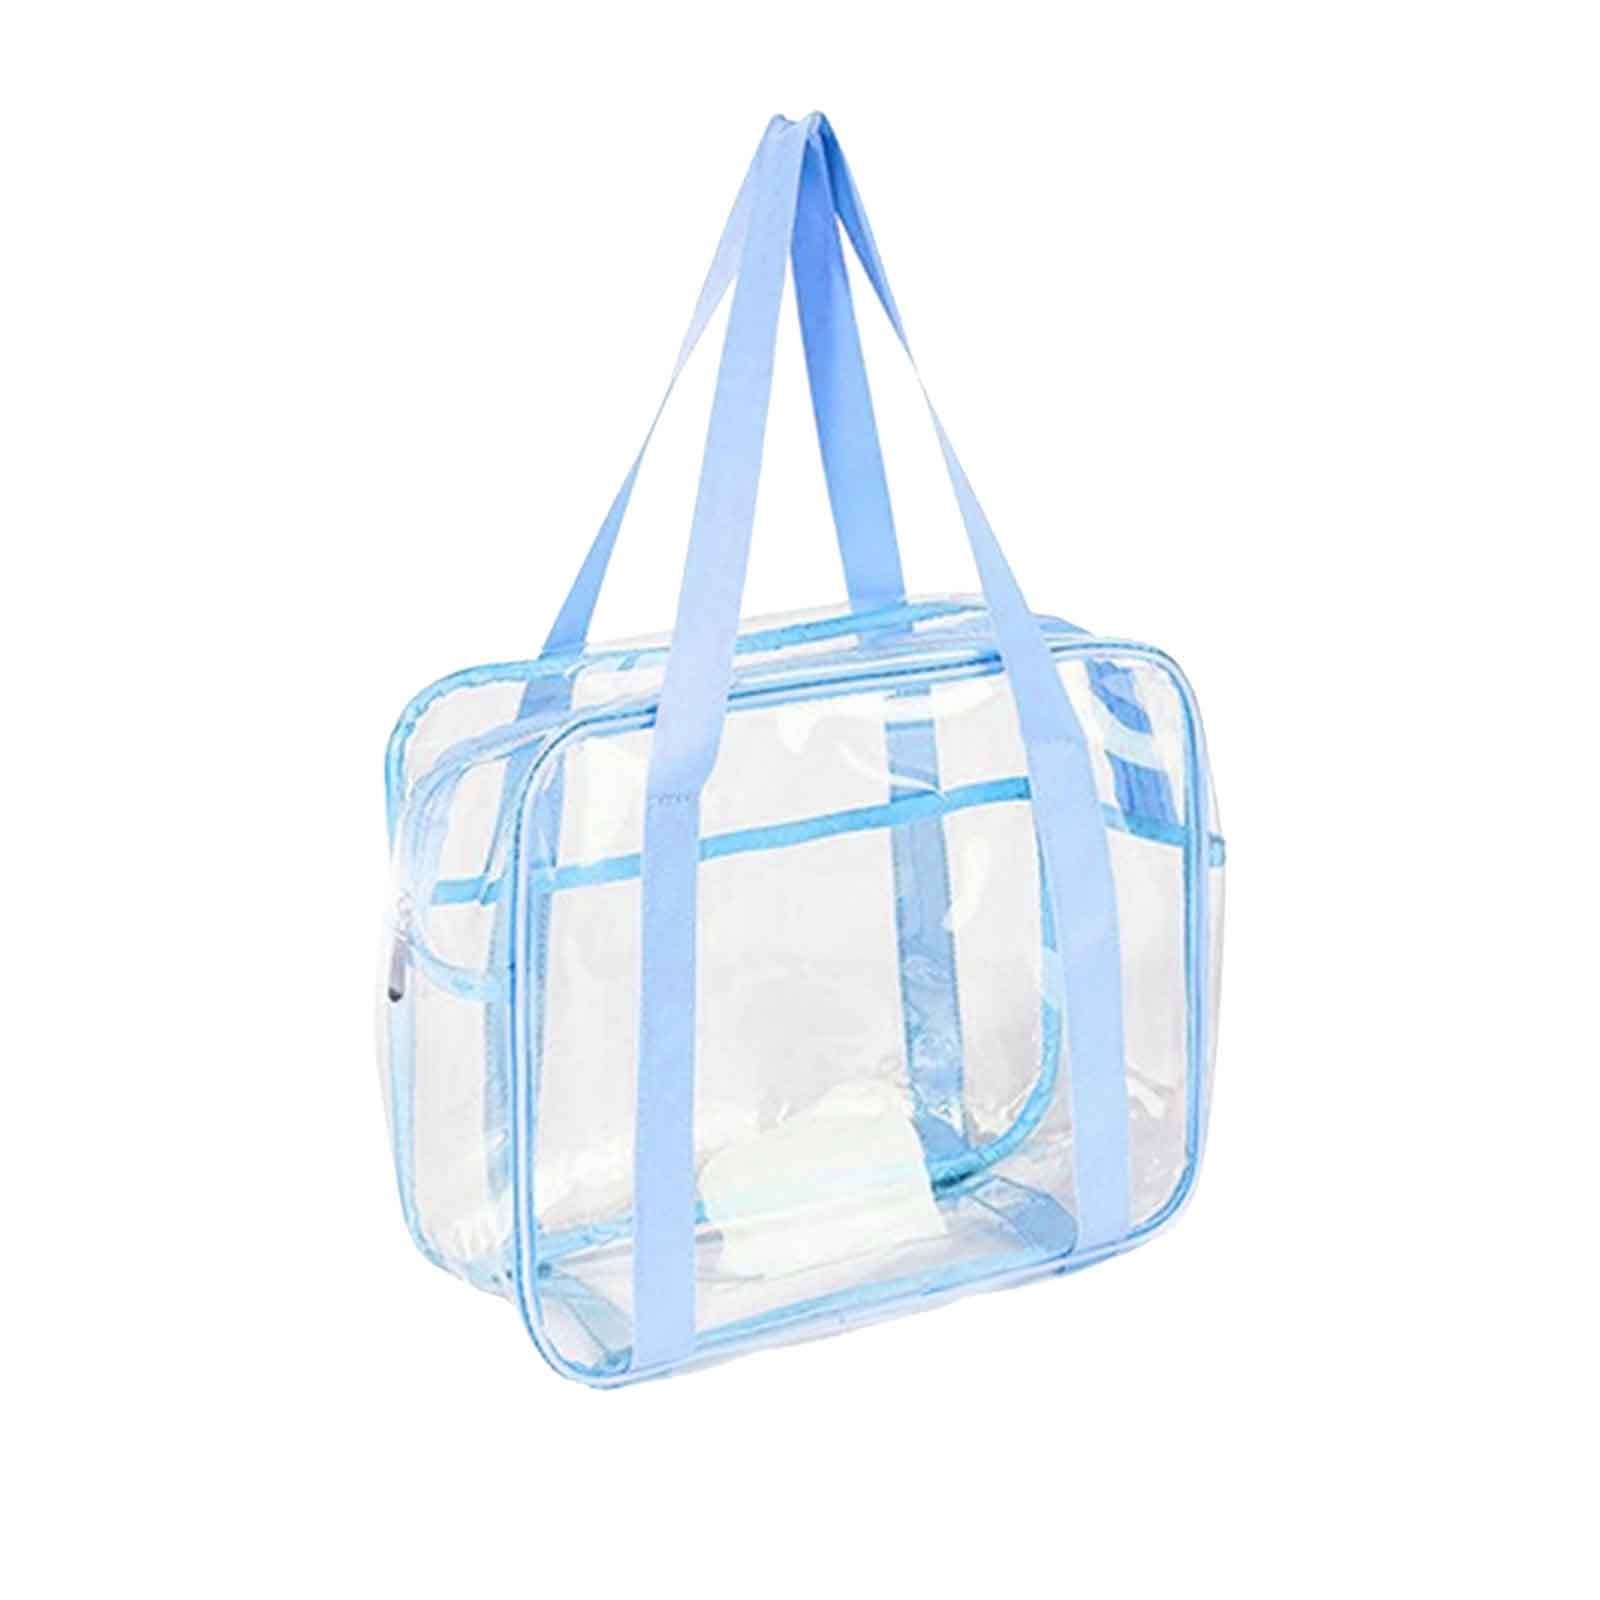 Jeashchat Zippered Tote Bag, Portable Bathroom Travel Bag in Waterproof Clear PVC Cosmetic Bag, Adult Unisex, Size: One size, Blue